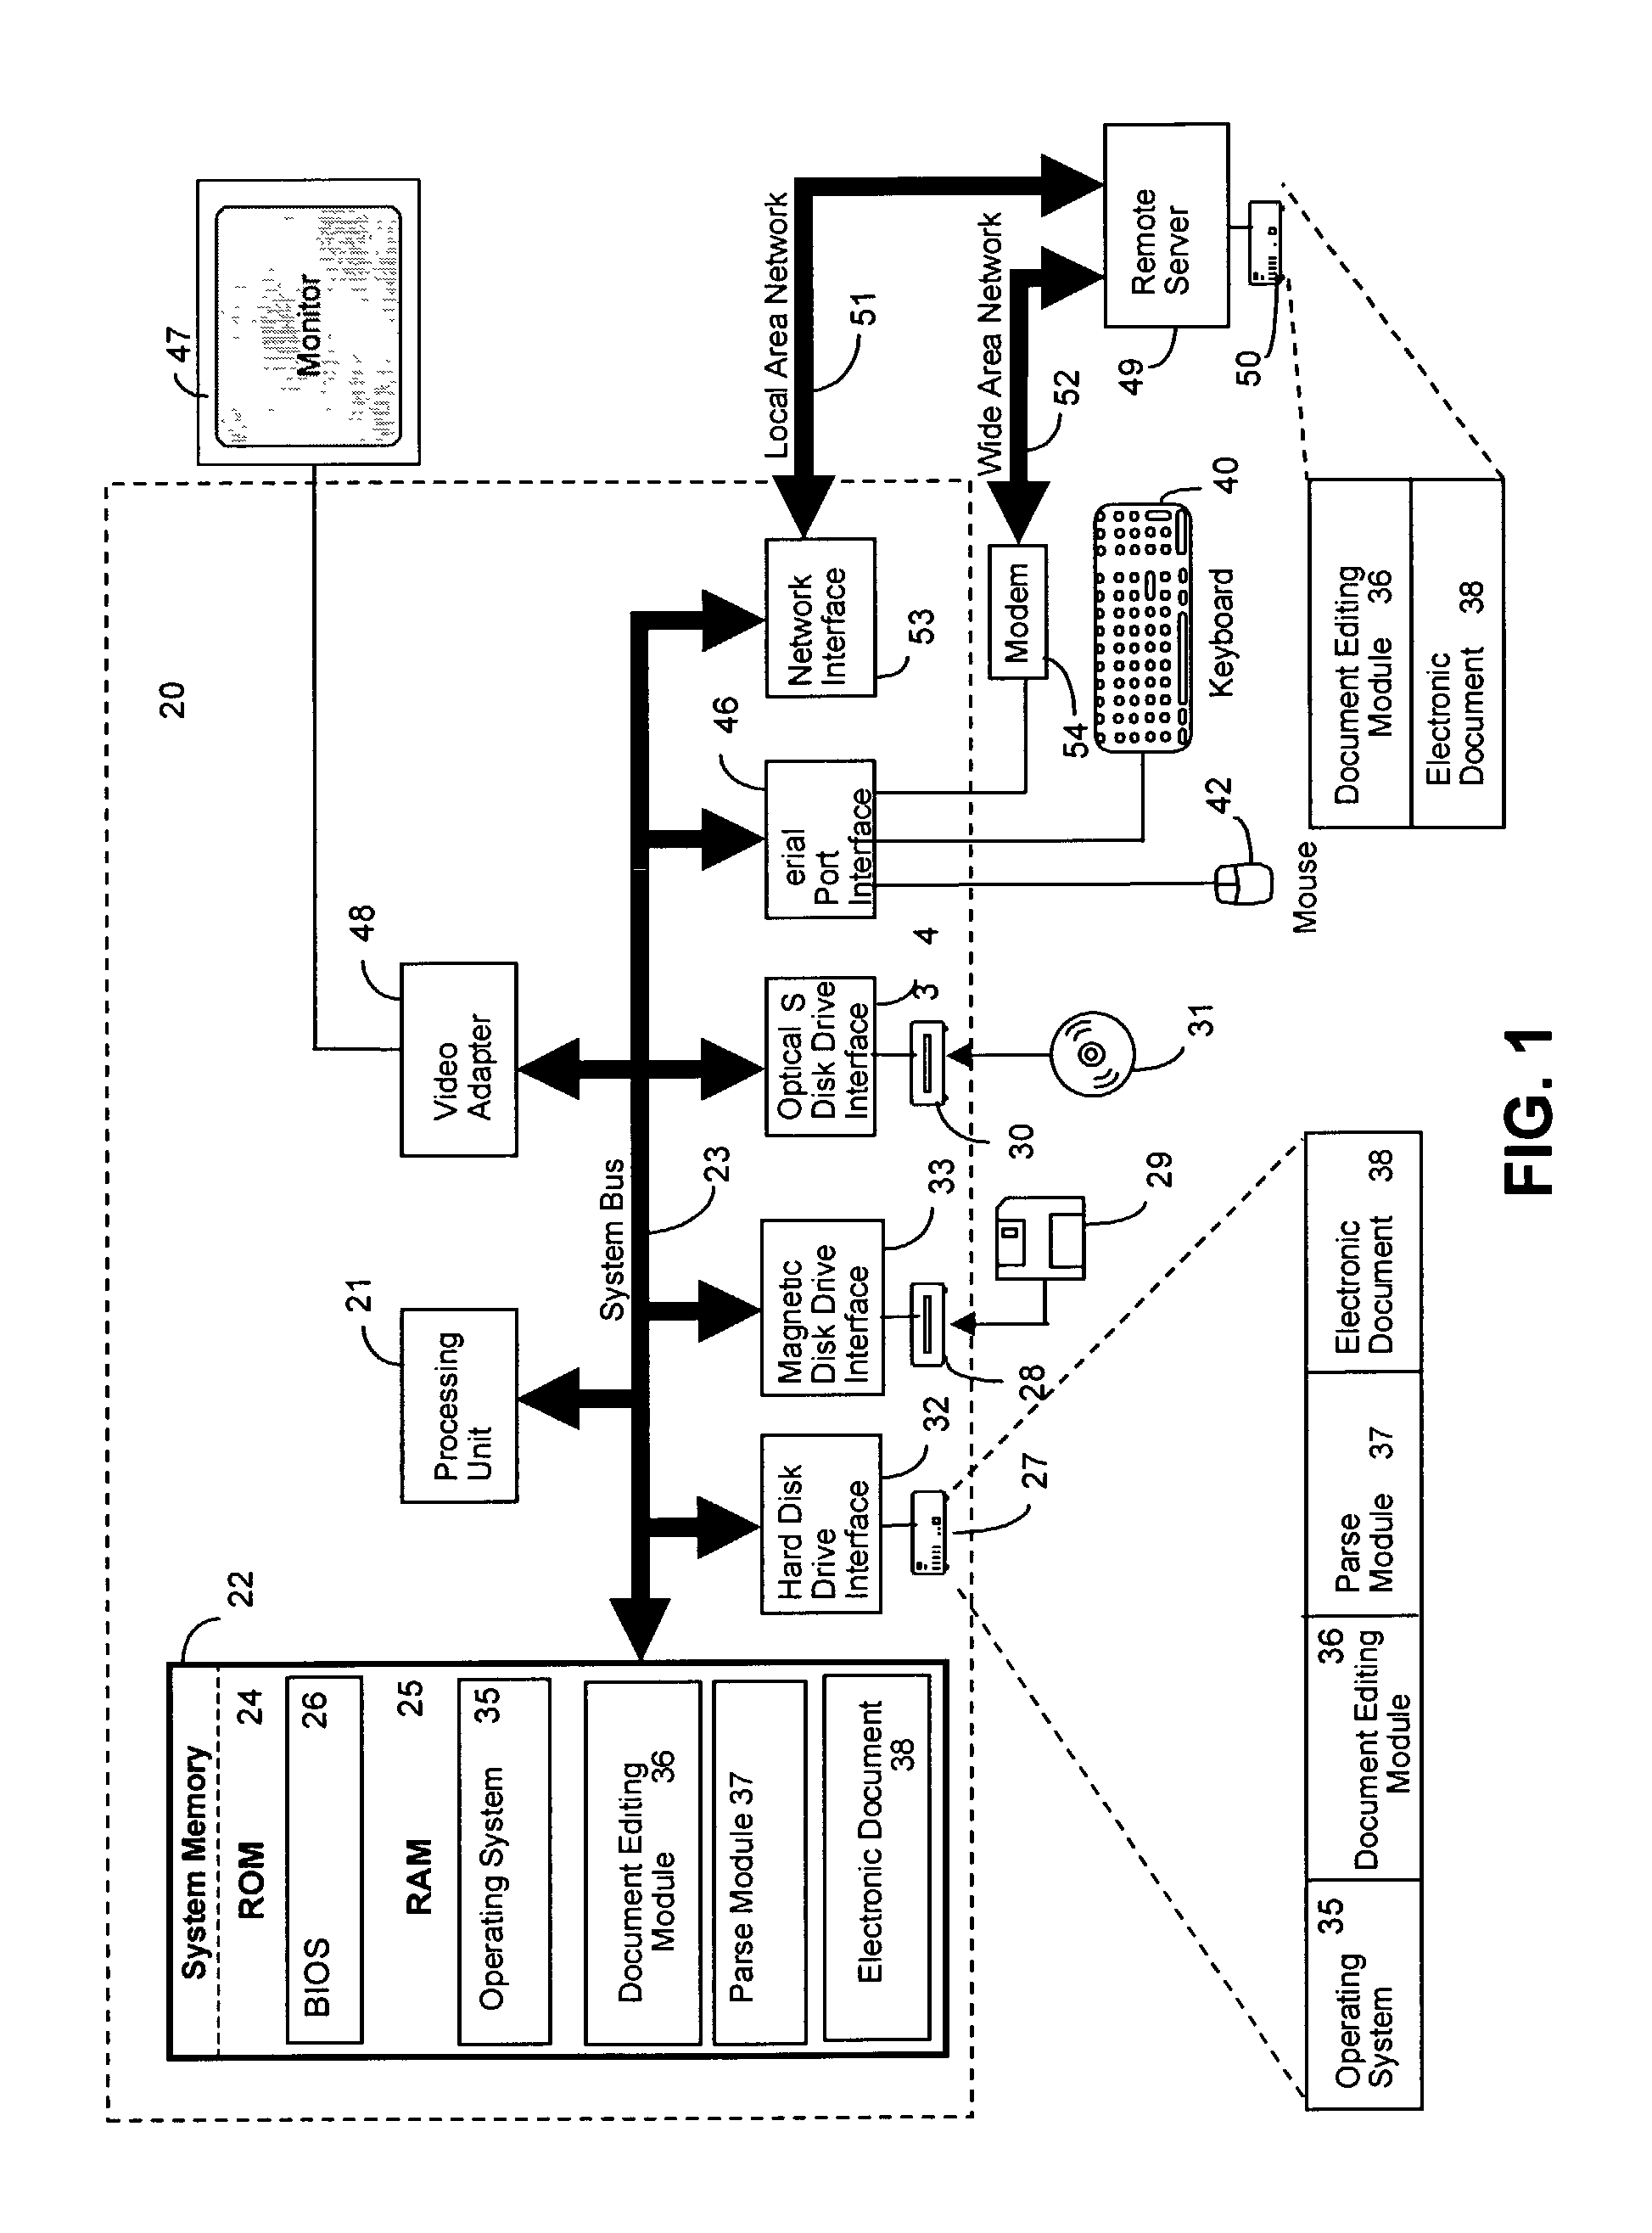 Method and system for editing electronic ink